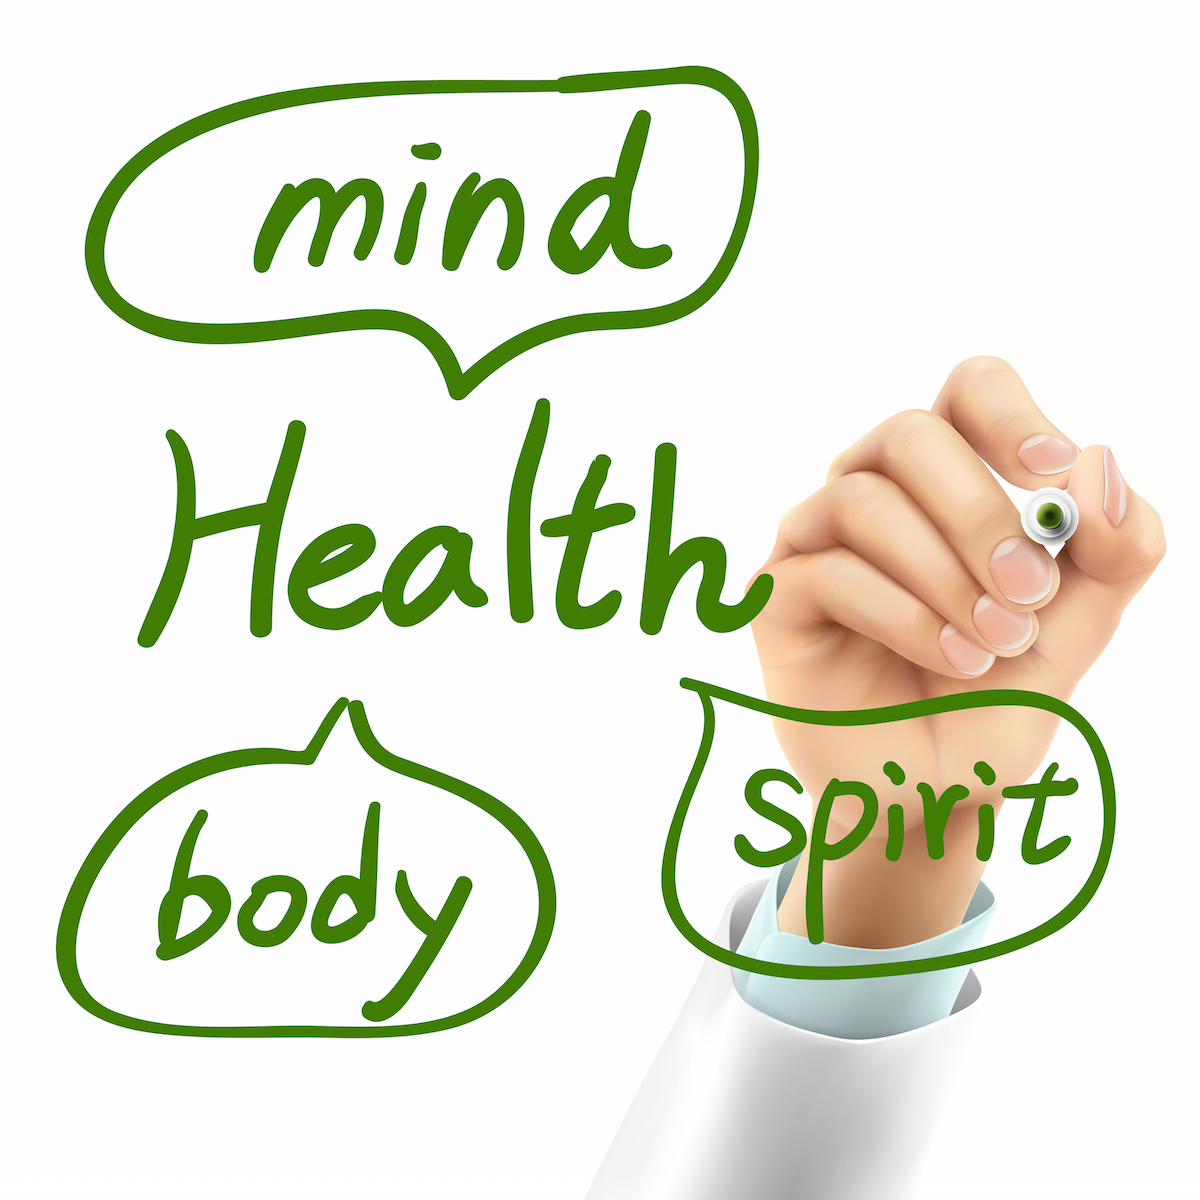 Holistic Treatments For Mental Health And Substance Abuse | Wellness Center  NJ